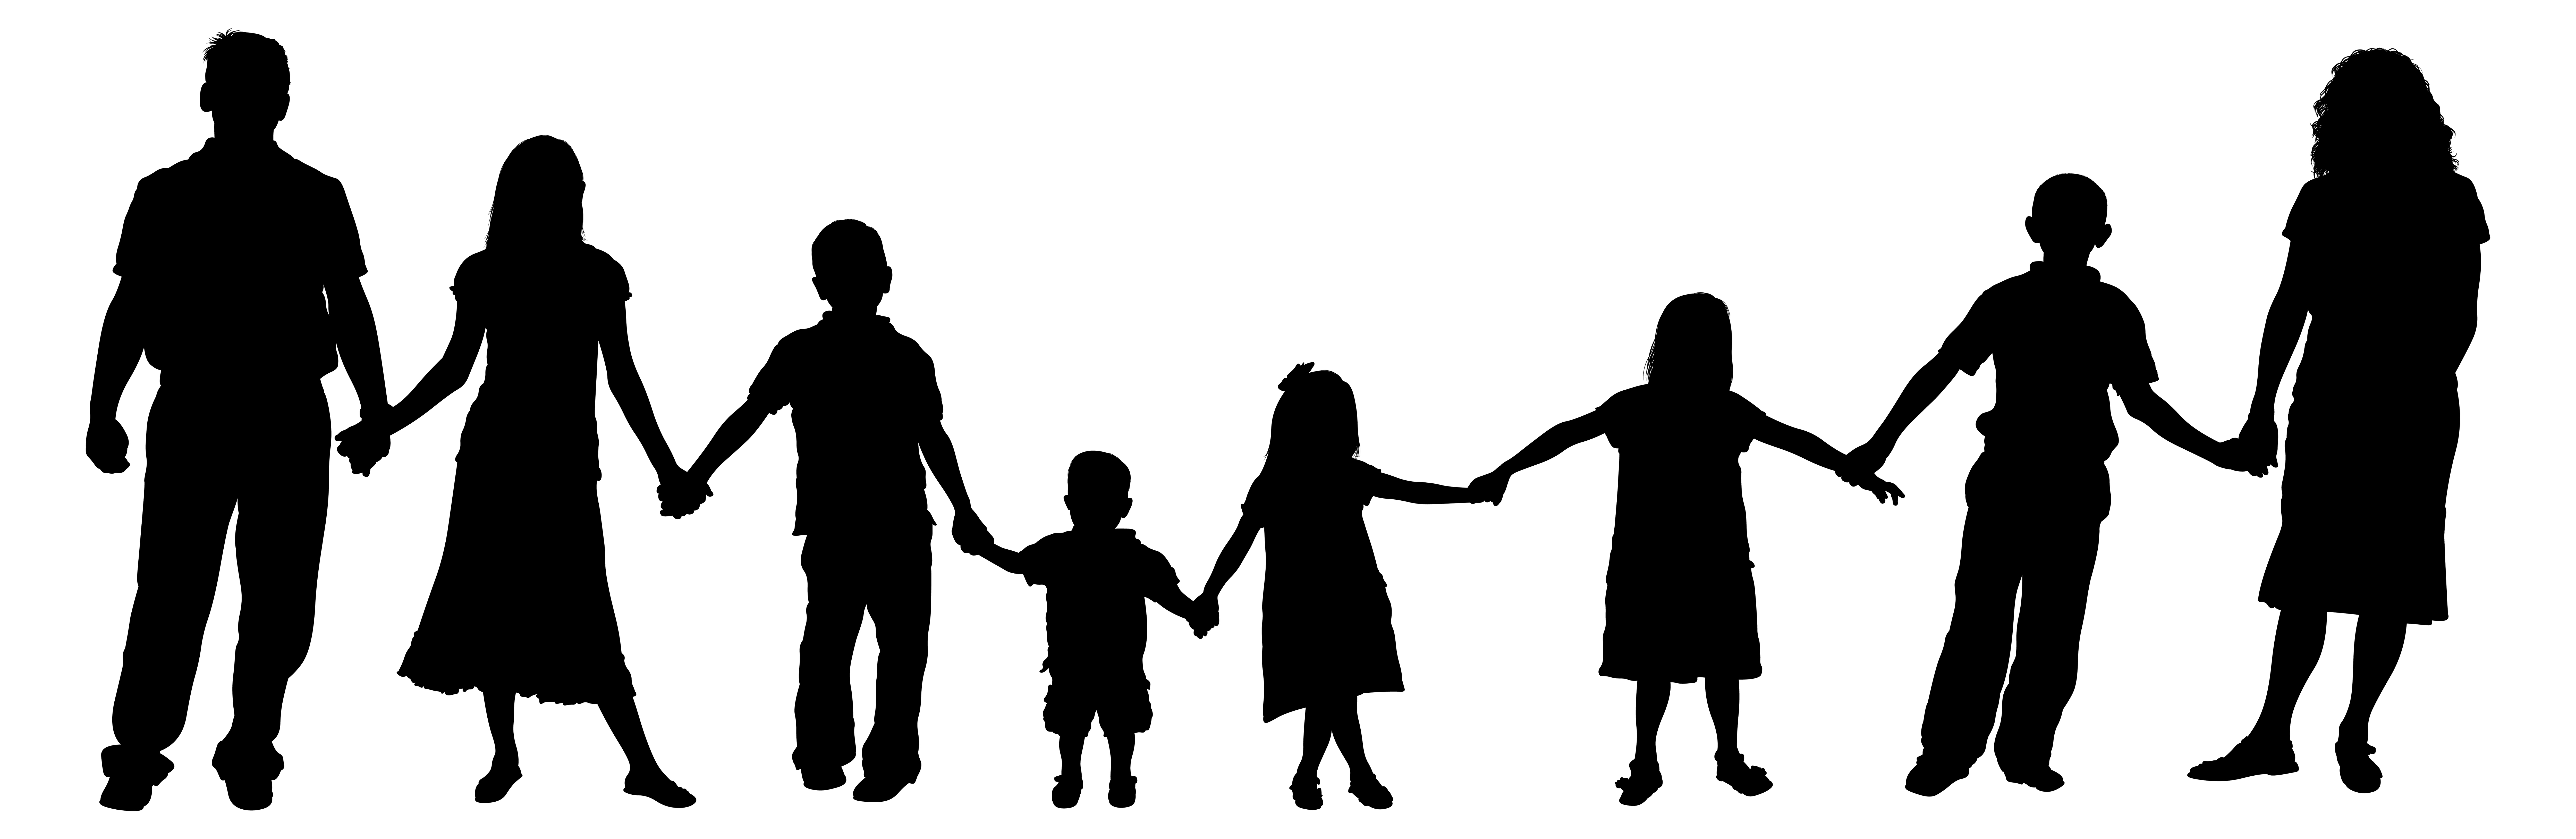 Family Silhouette Pictures at GetDrawings.com.